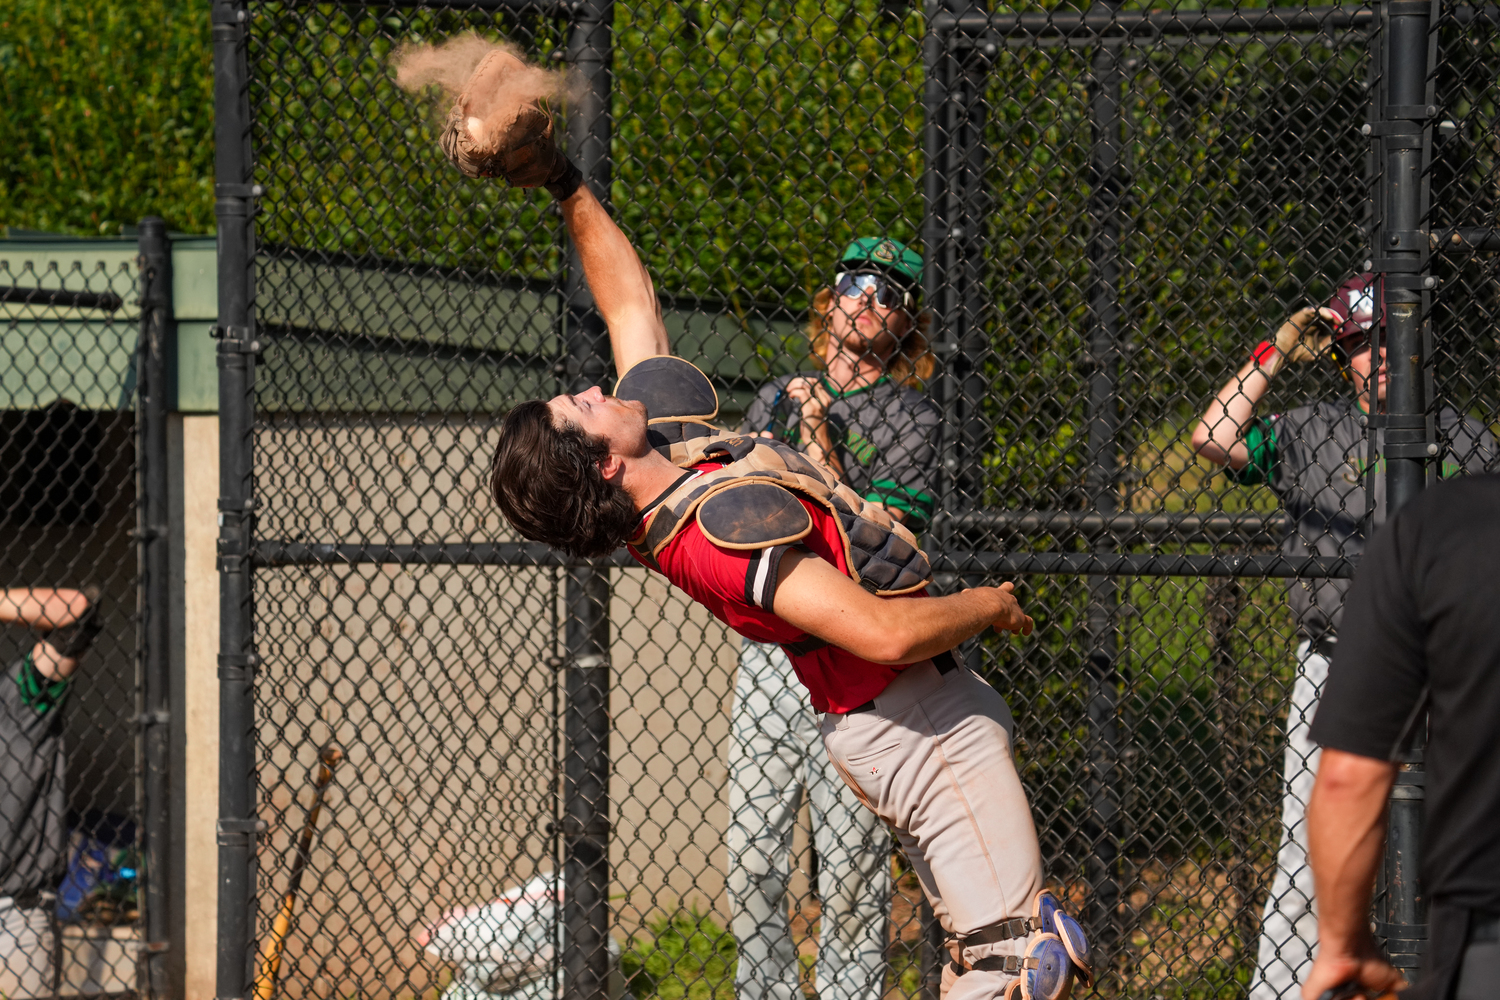 Westhampton catcher Ethan Toone (Southern Illinois) makes a tough play on a pop up behind home plate.   RON ESPOSITO